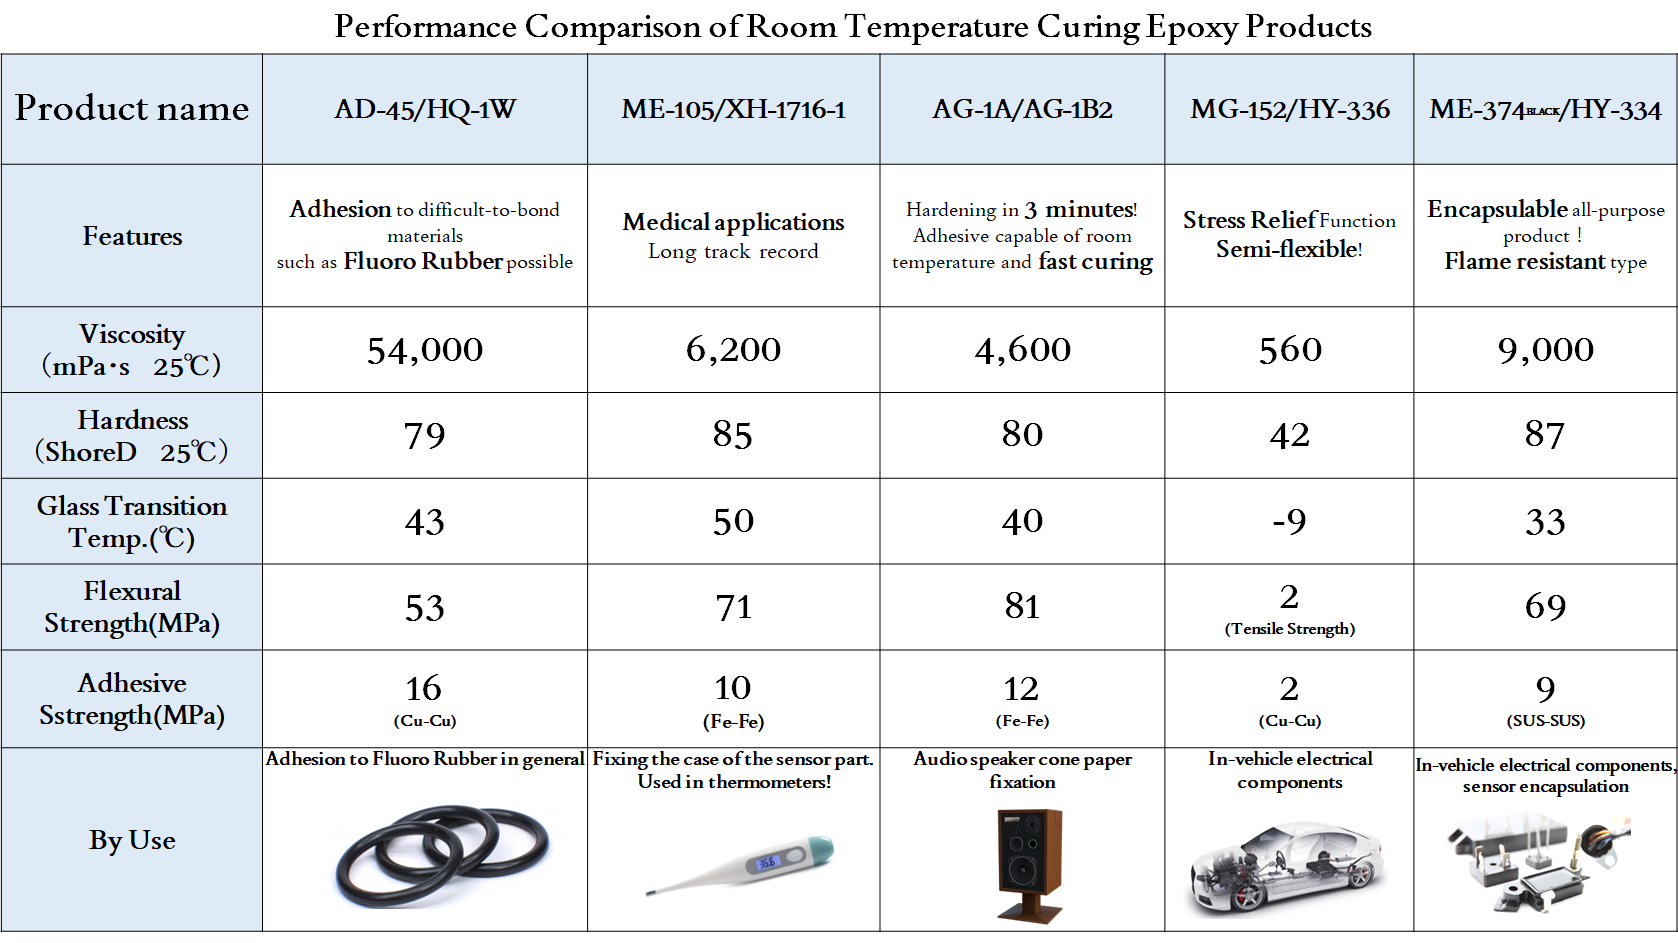 Room Temperature Curing Epoxy Product Lineup_characteristic table_EN